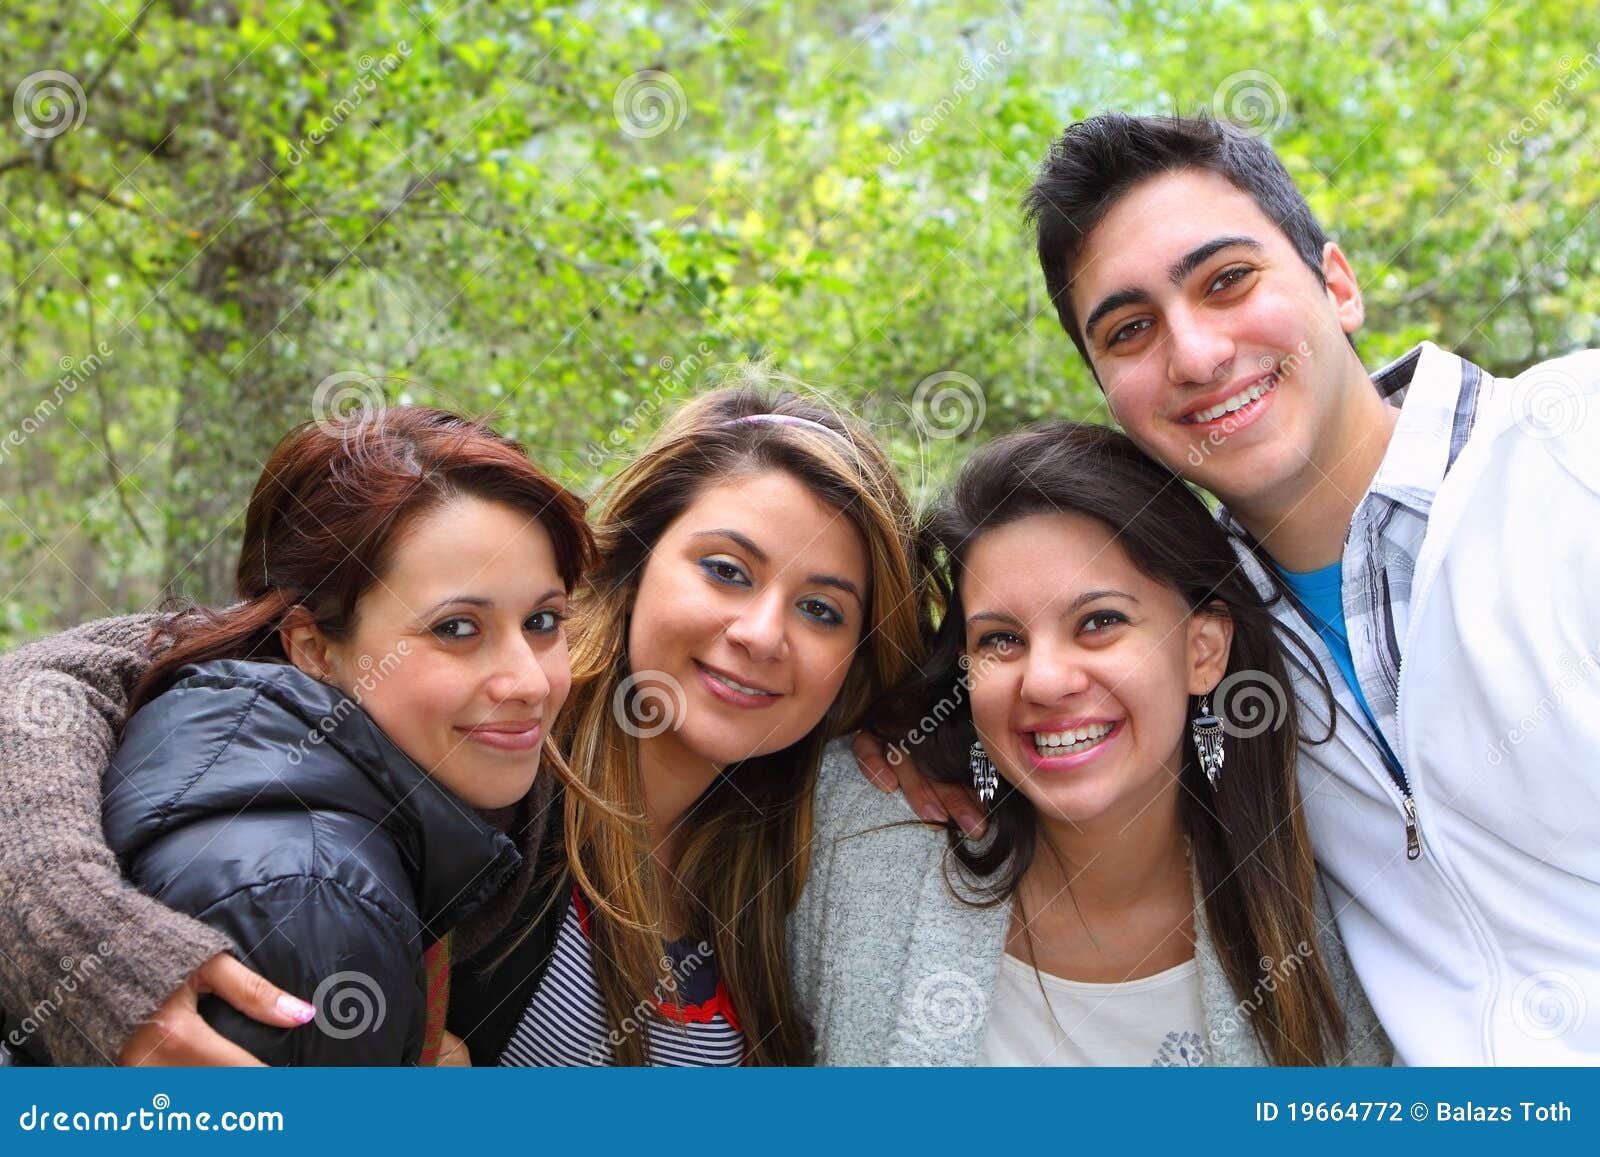 4 Friends Smiling Together stock photo. Image of brother - 19664772